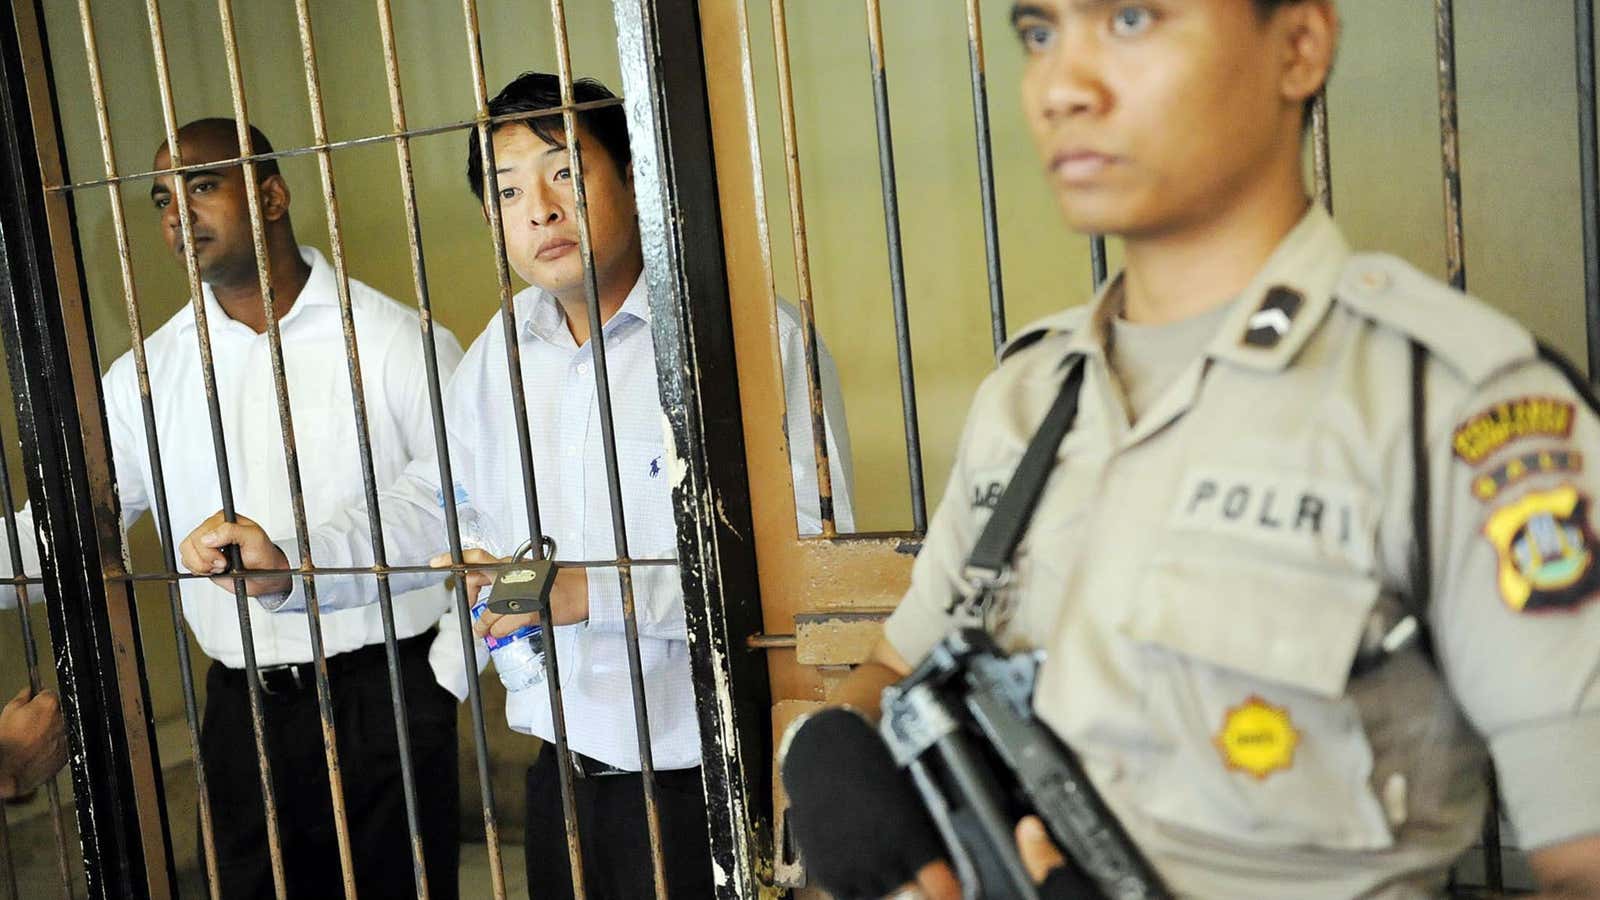 Australian death row prisoners Andrew Chan (C) and Myuran Sukumaran (L) are seen in a holding cell in Bali.